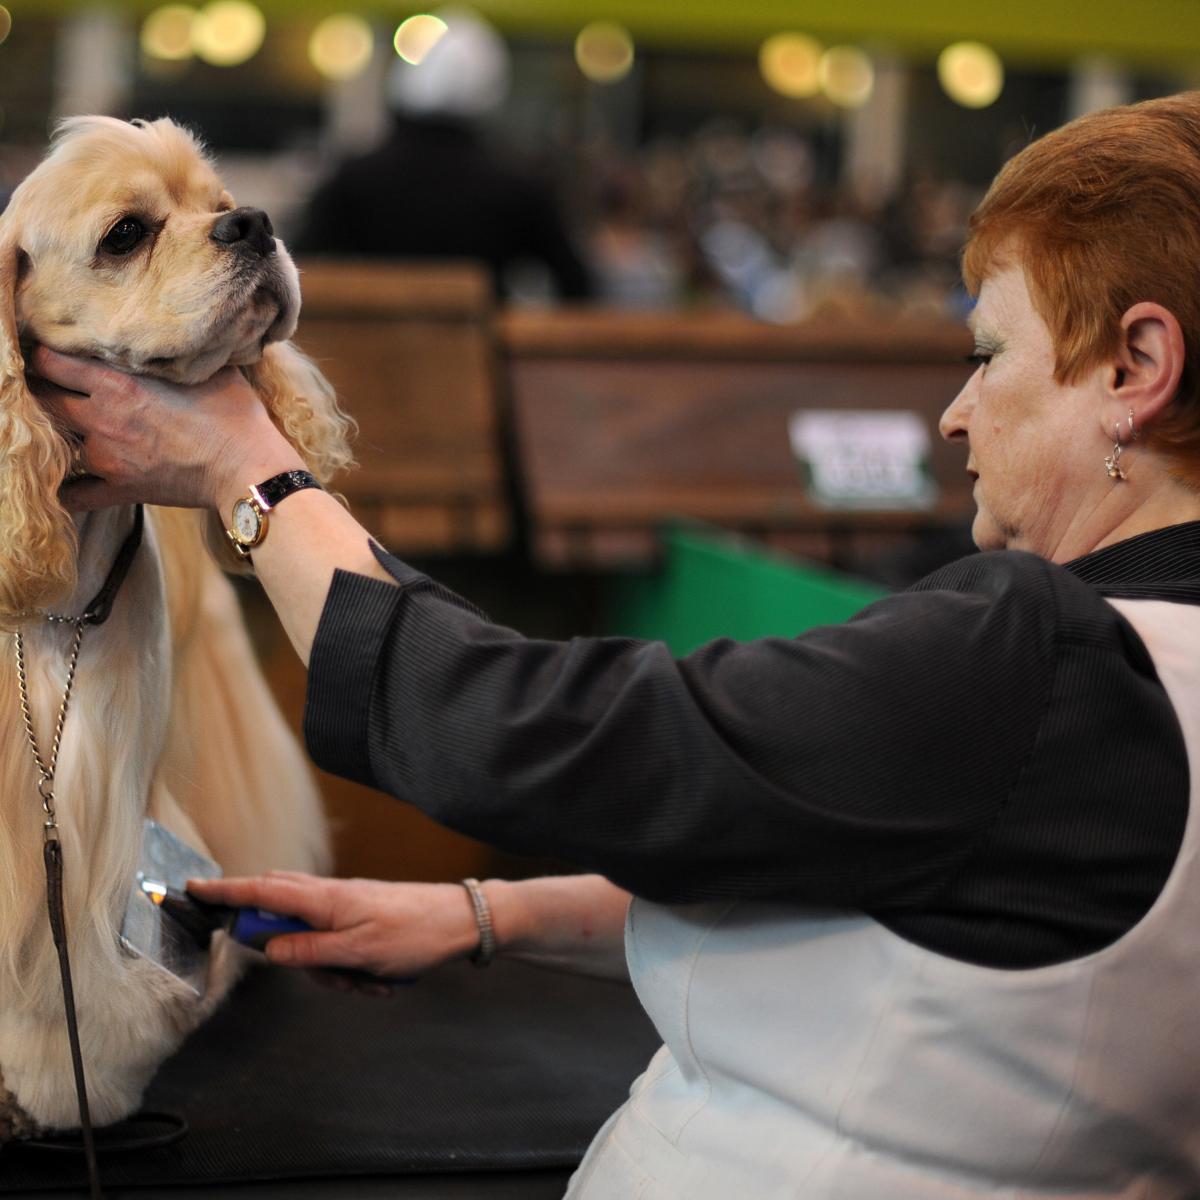 Crufts Dog Show Results 2017: Saturday Winners, Updated Schedule and TV